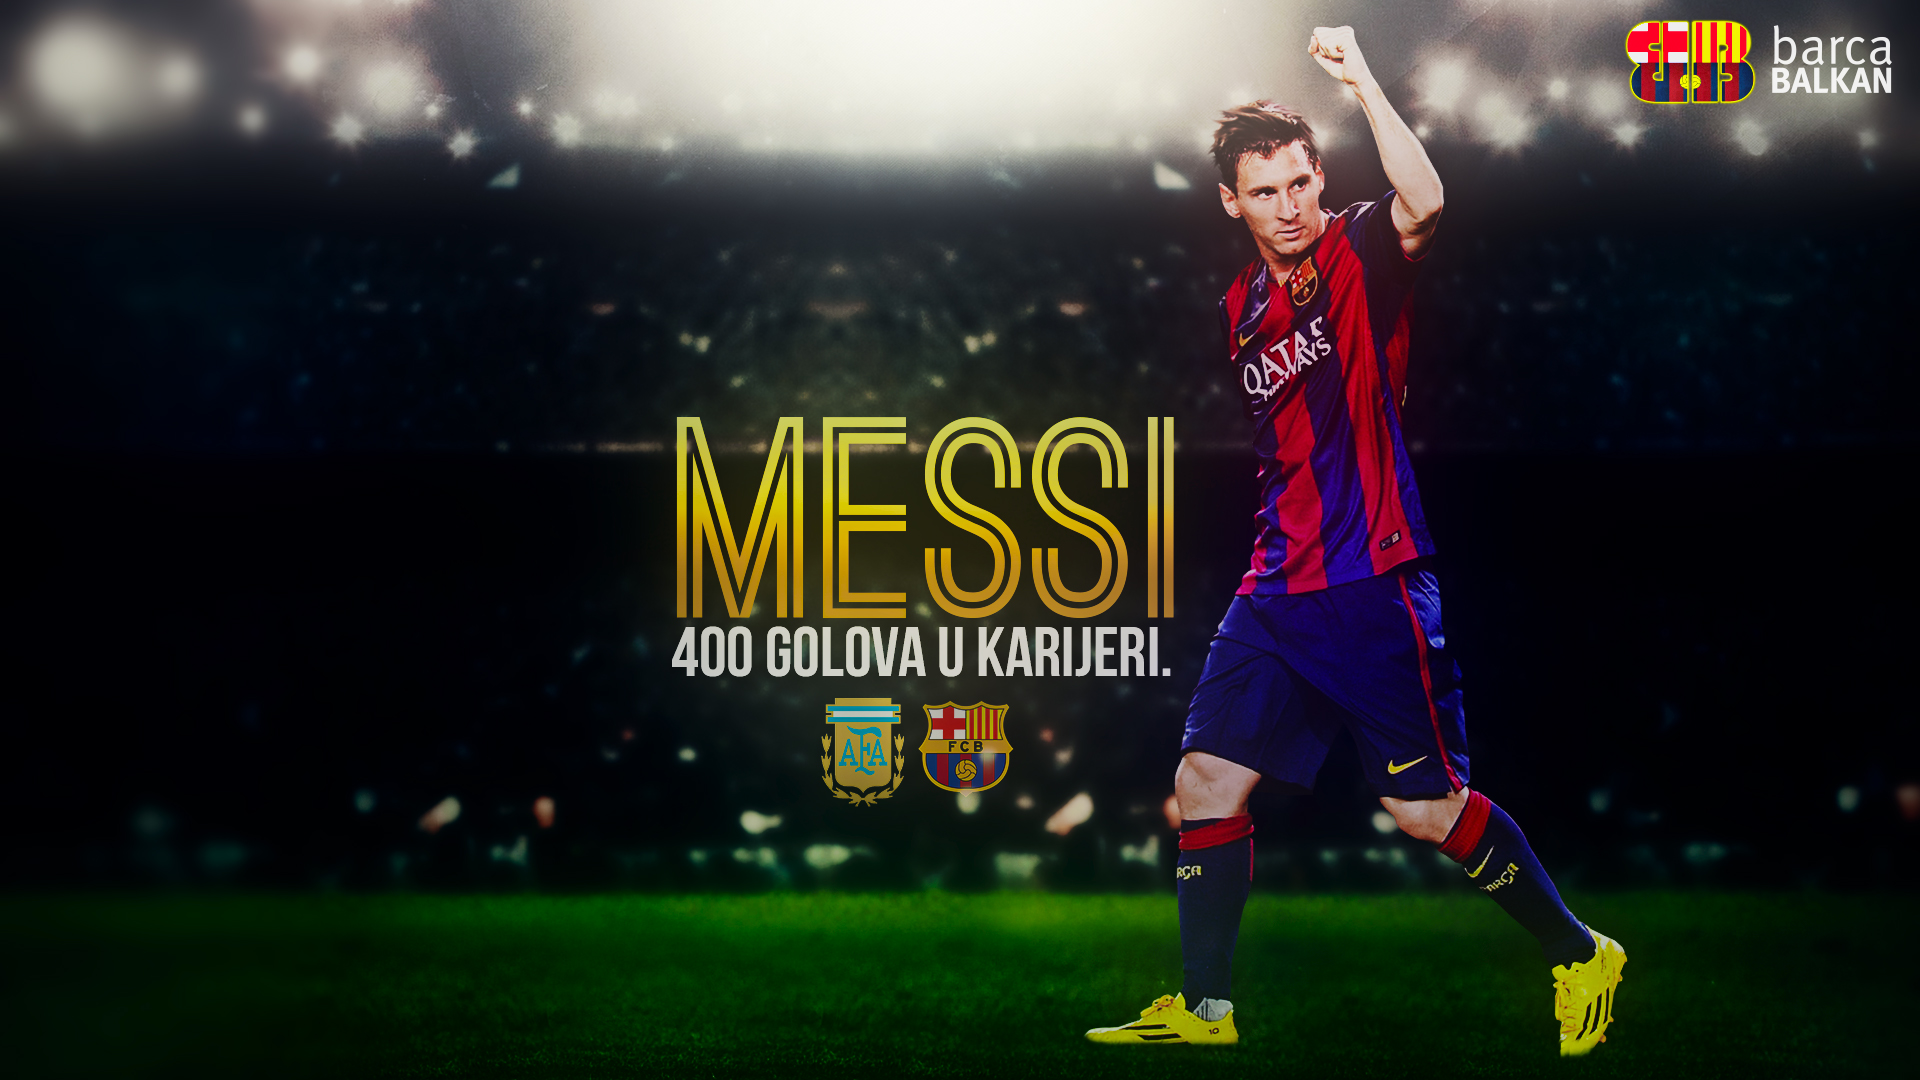 Lionel Messi 2015 Free Wallpapers 8413 - HD Wallpapers Site